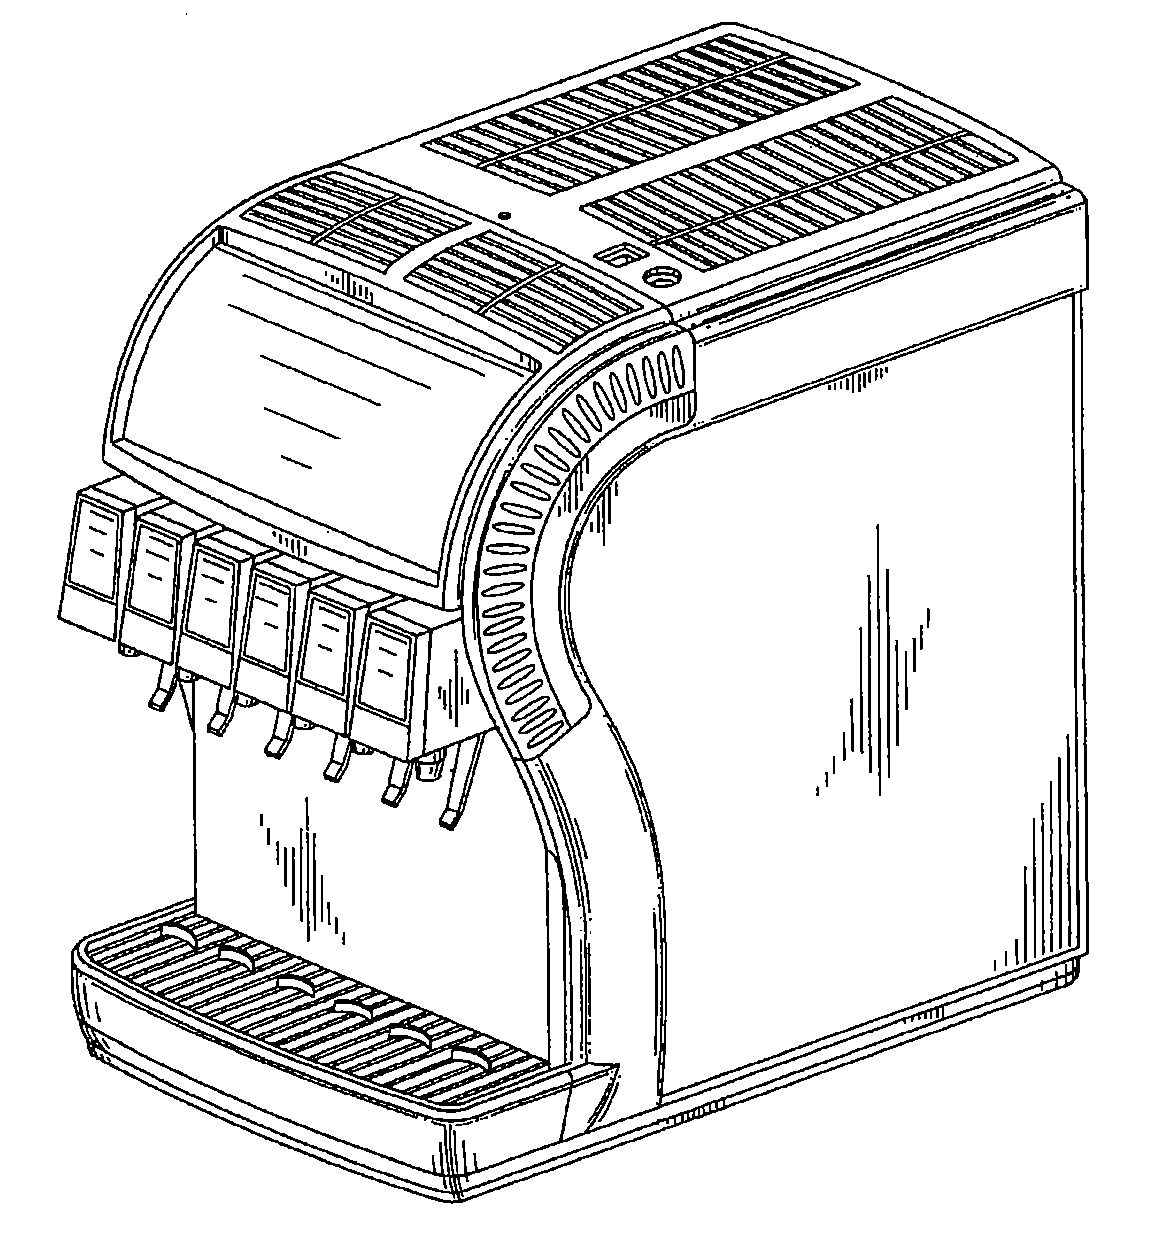 Example of a console type beverage dispenser with pluralvalve.  
